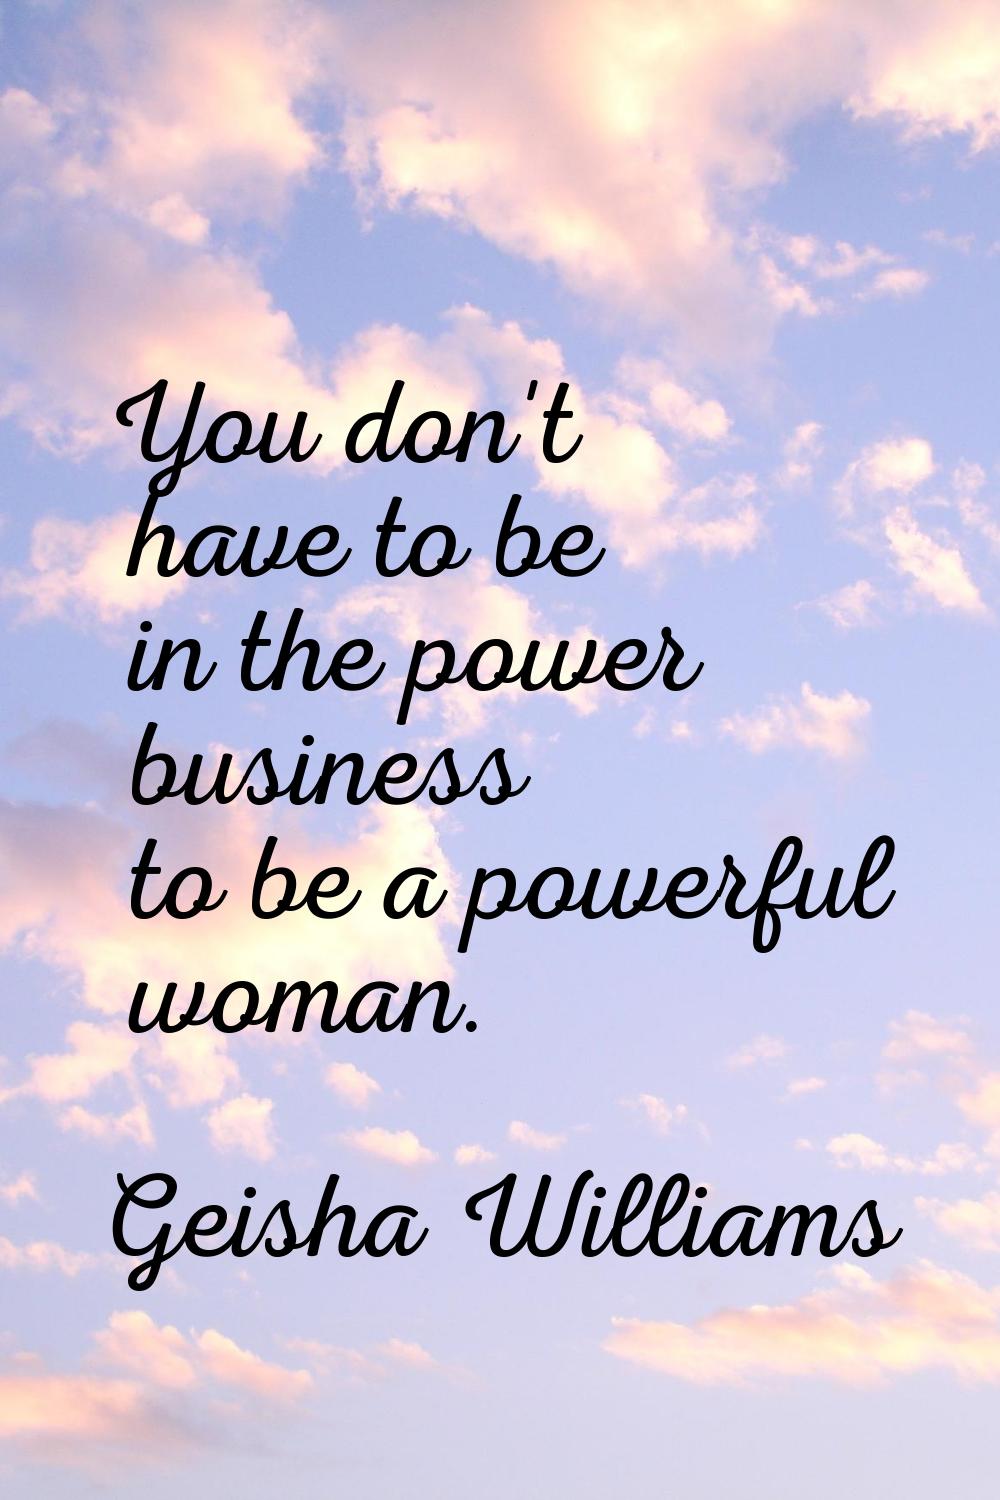 You don't have to be in the power business to be a powerful woman.